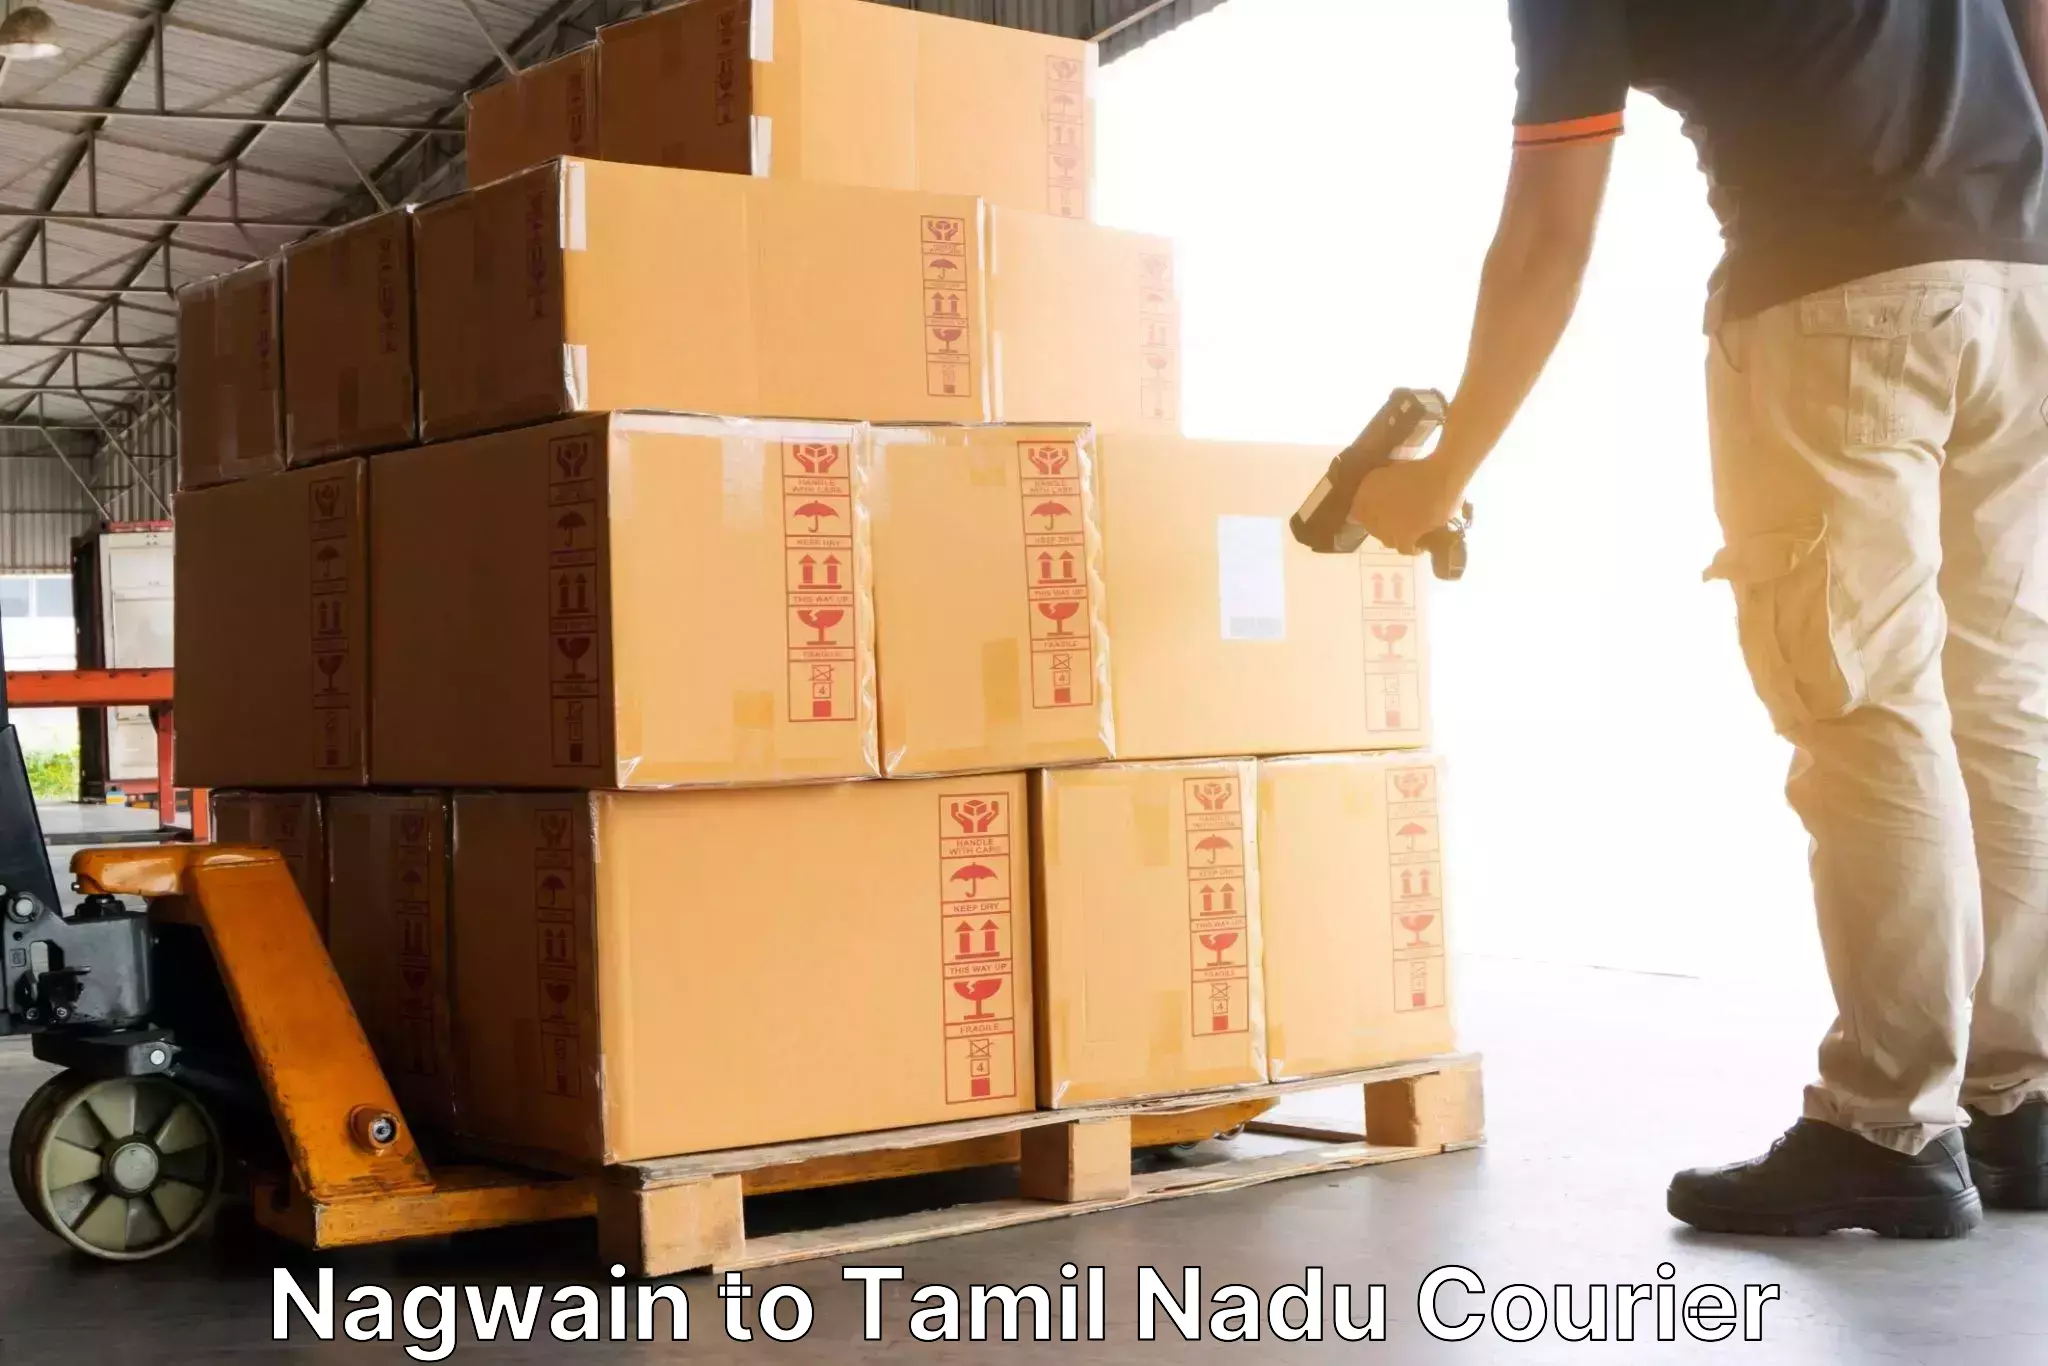 Courier tracking online Nagwain to Tuticorin Port